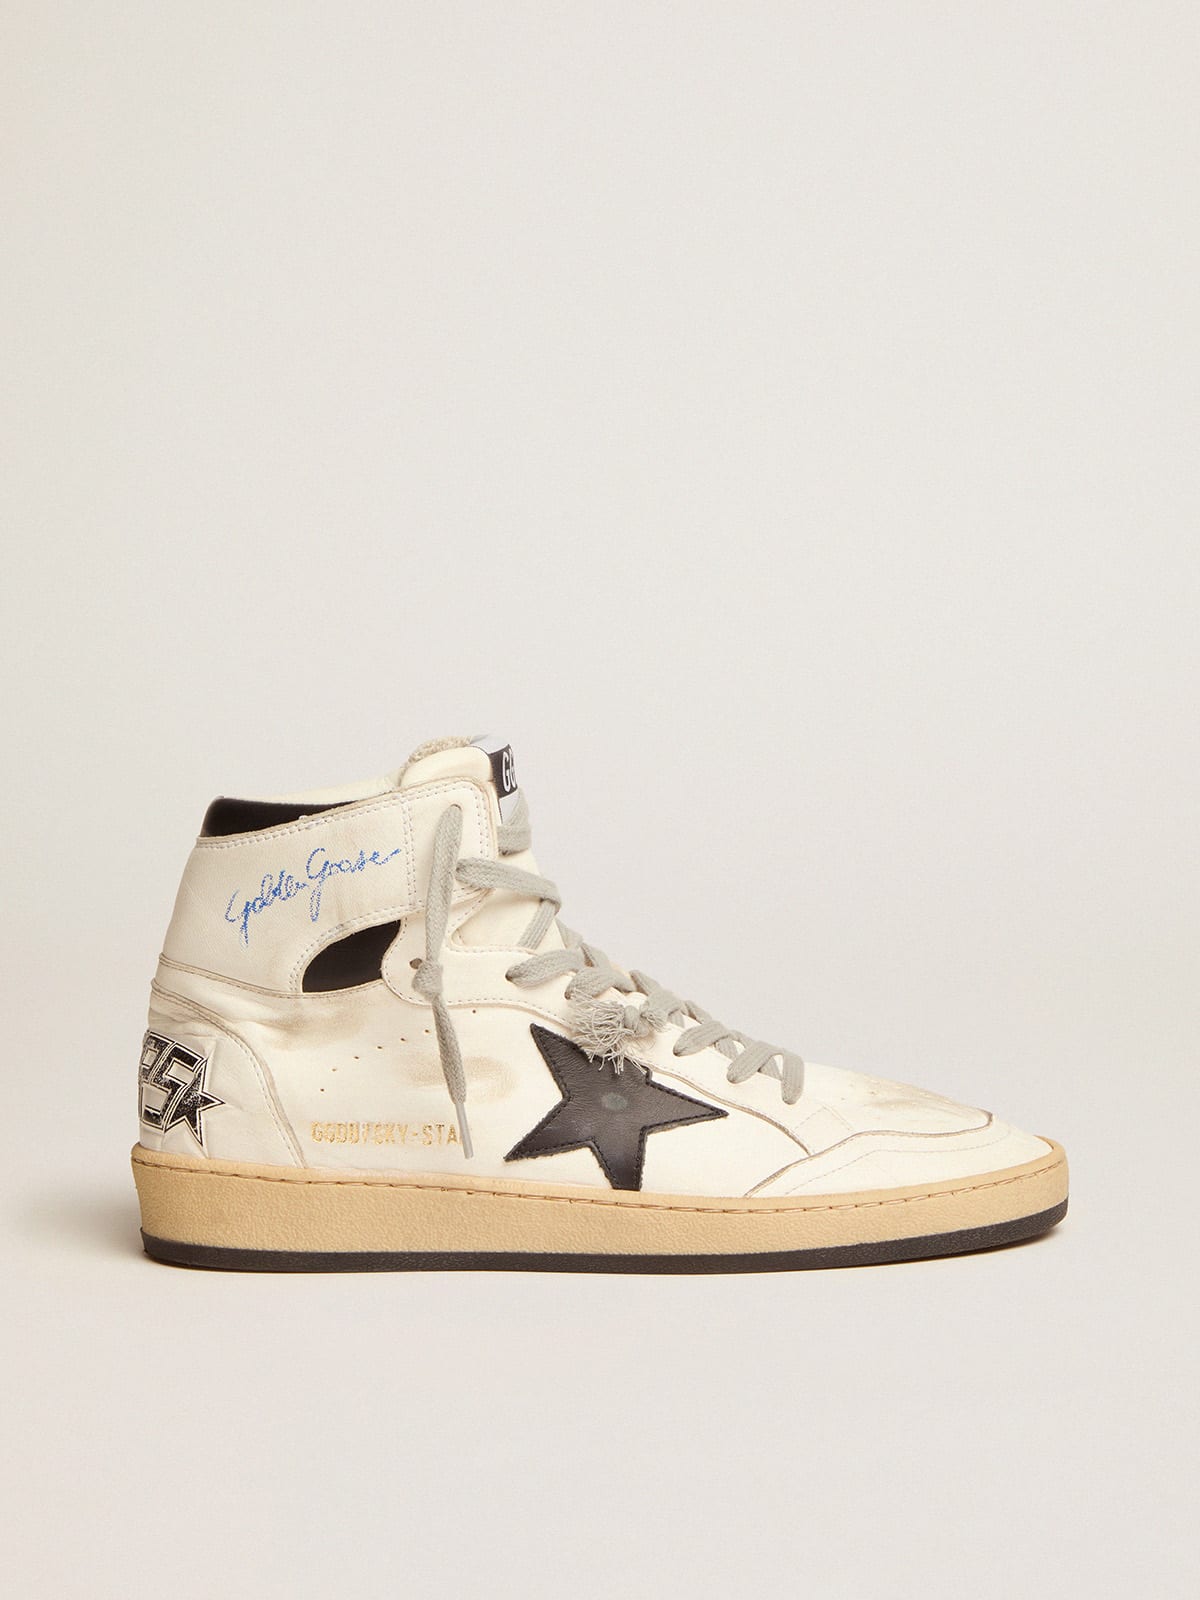 Women's Sky-Star sneakers with signature on the ankle and black leather inserts